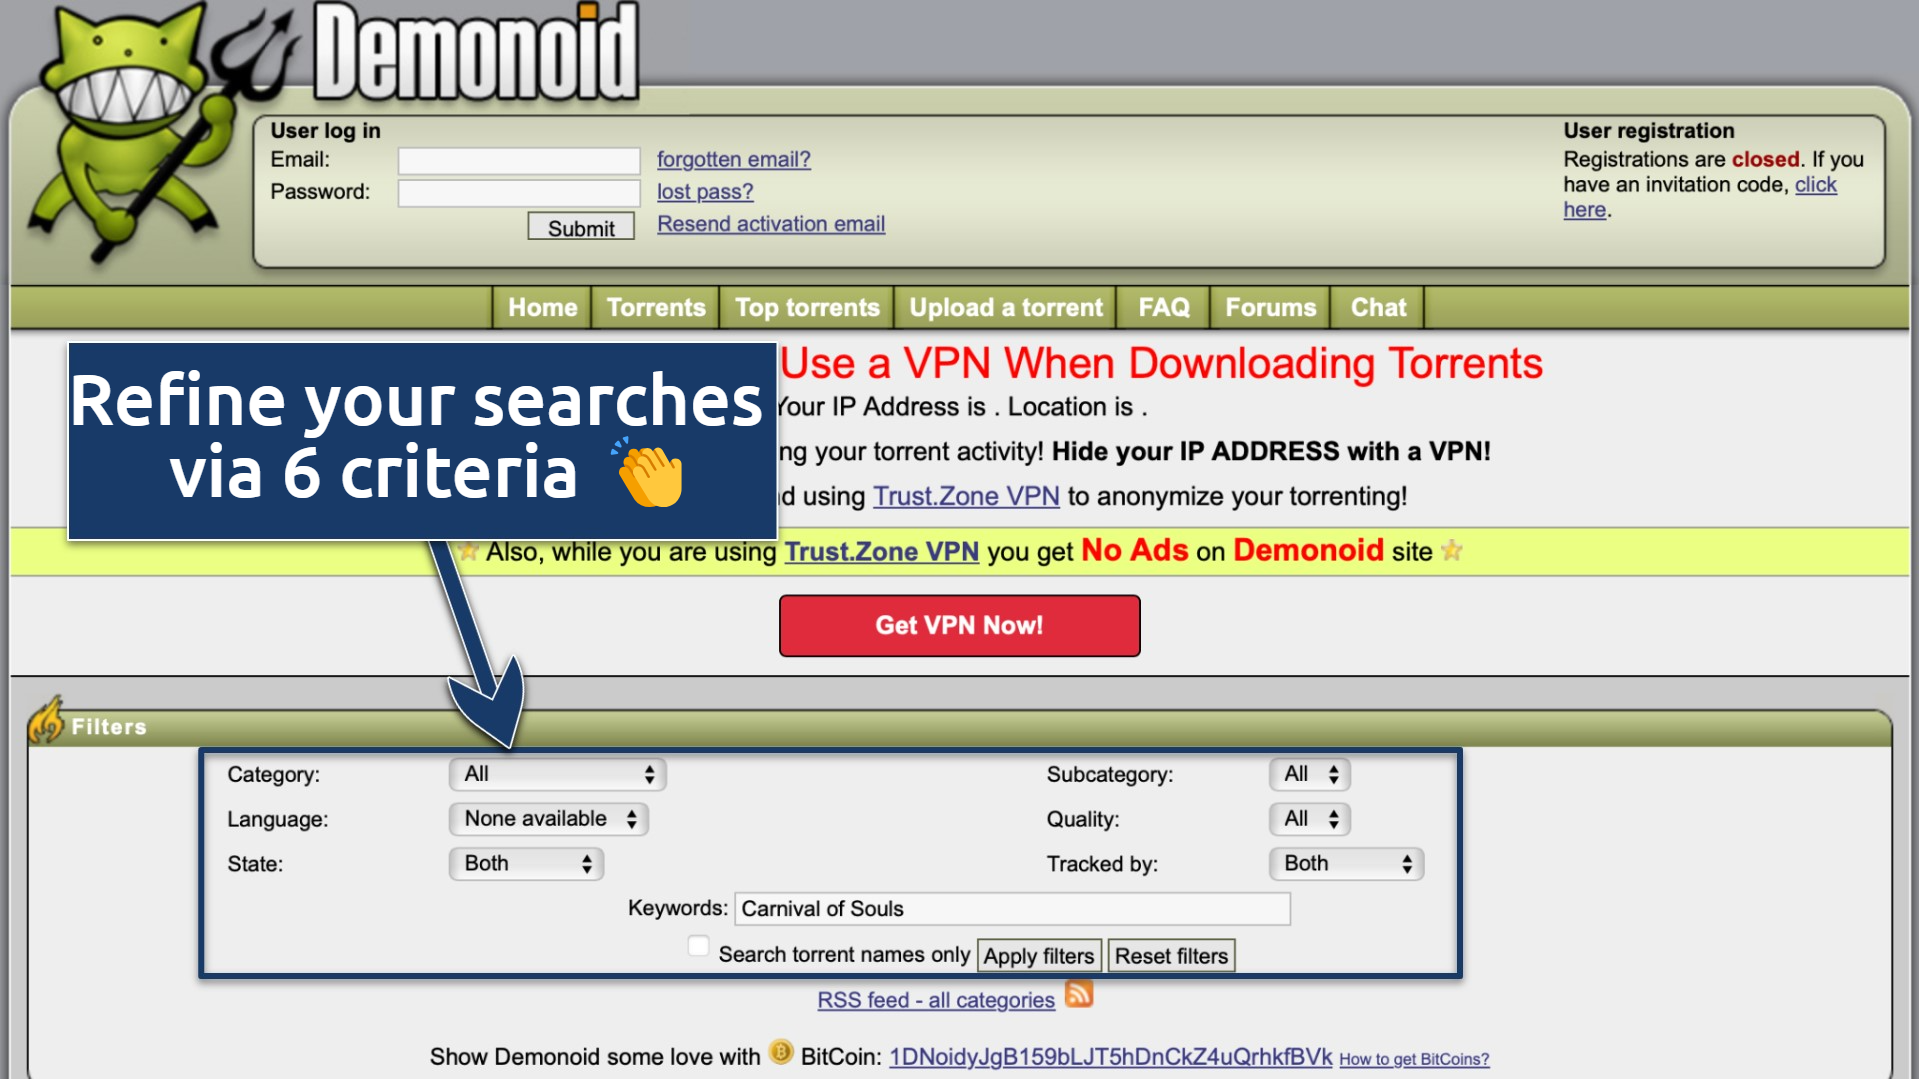 Screenshot of the Demonoid homepage with its various search criteria